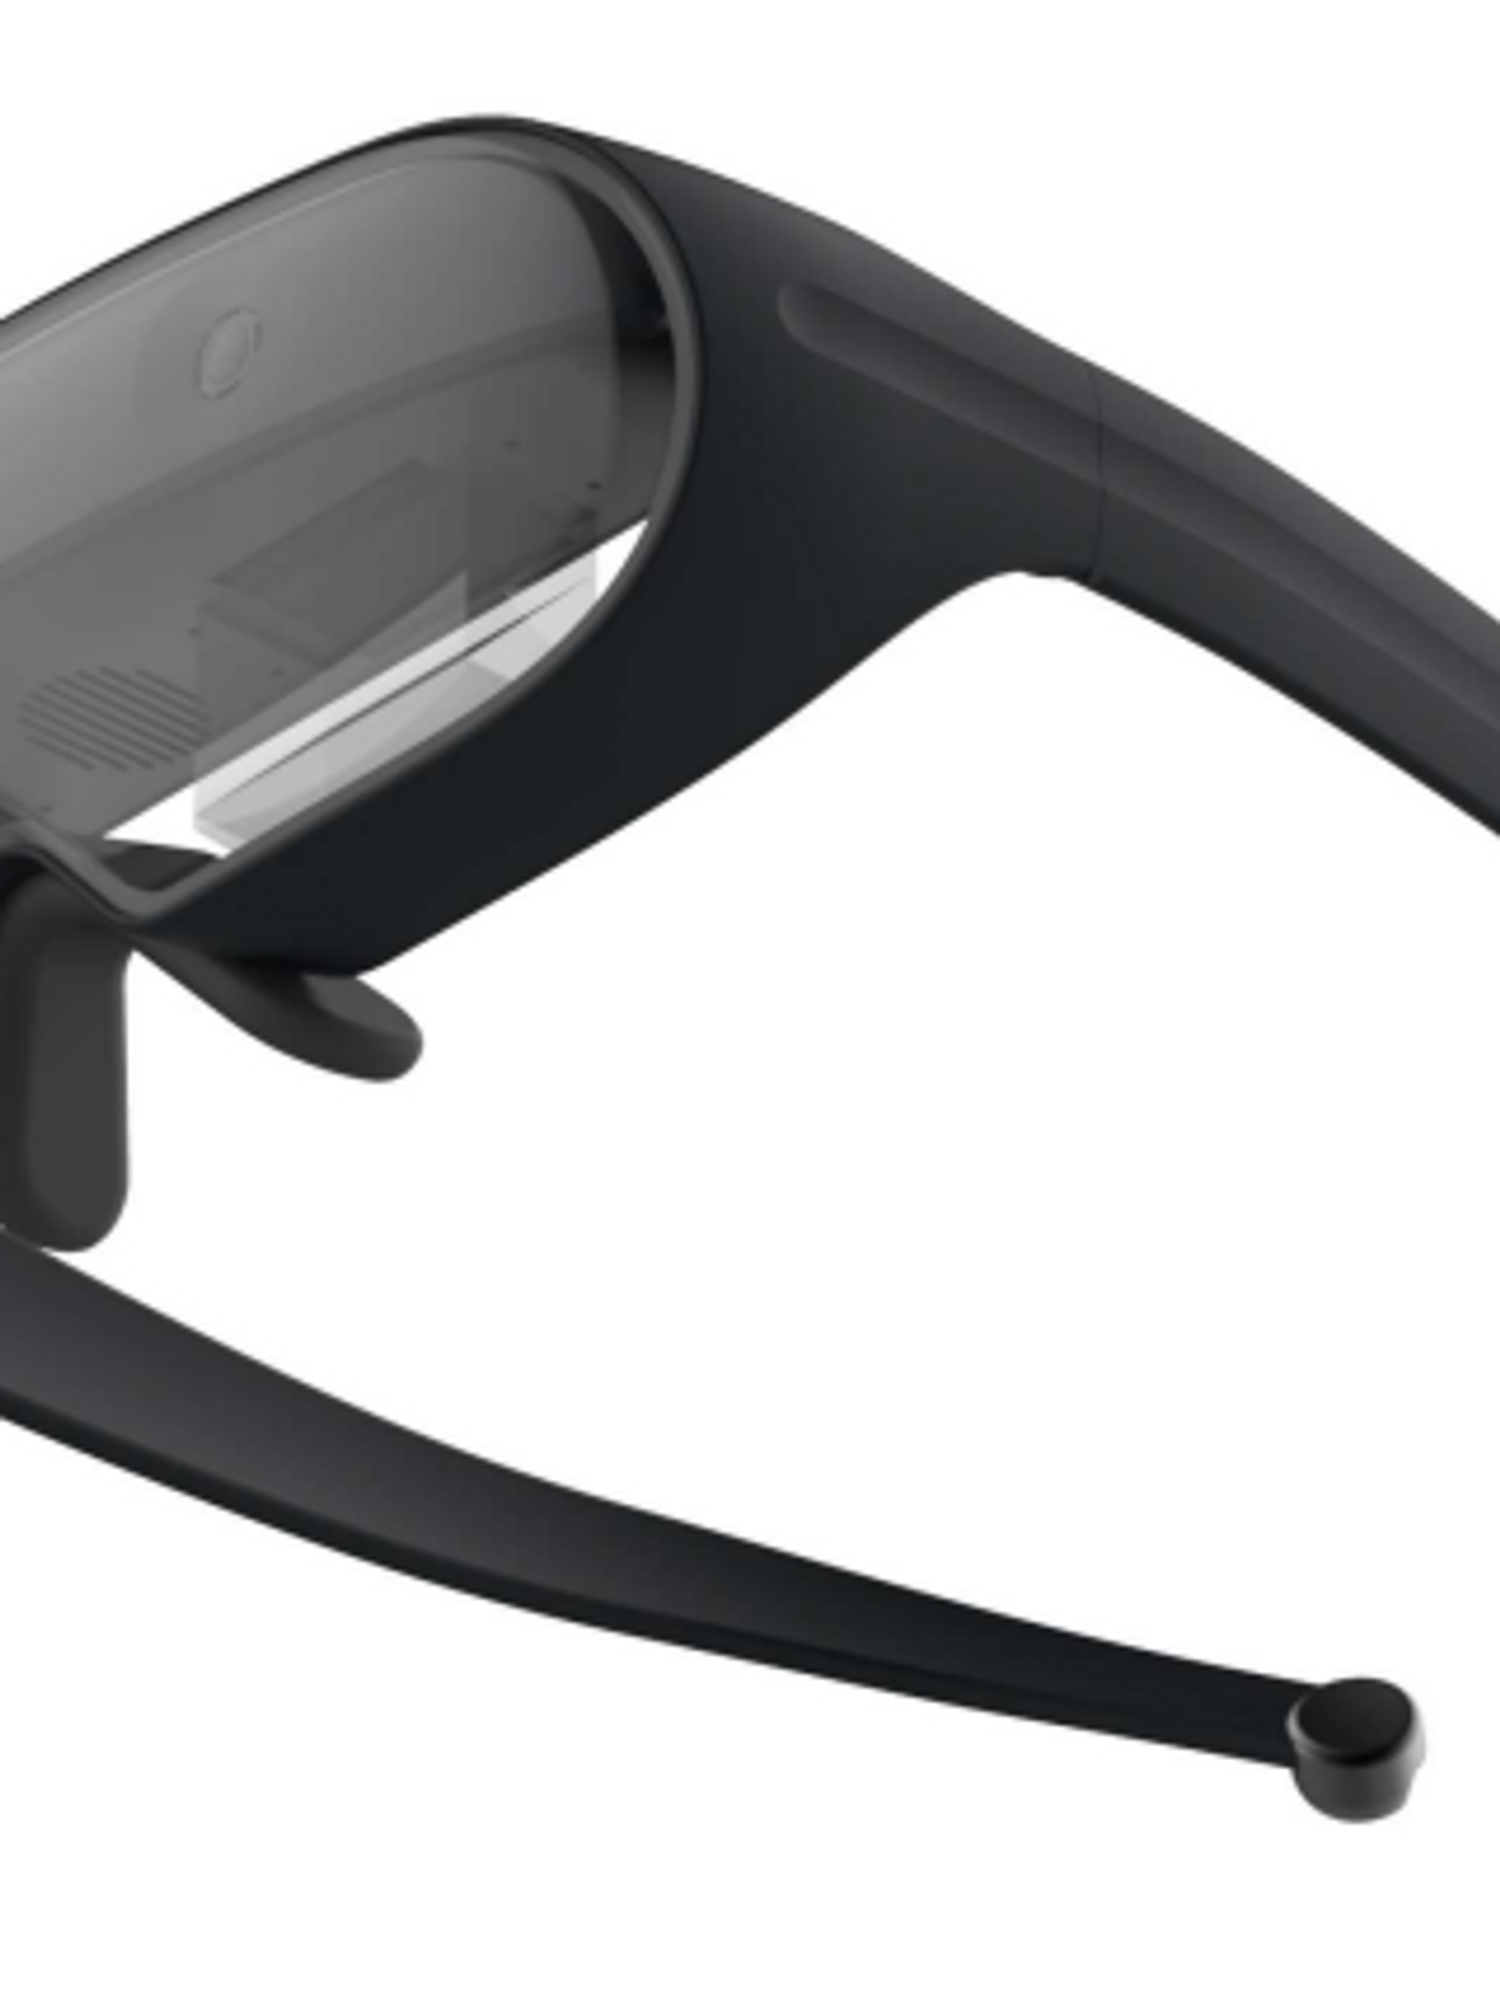 Samsung Files Trademark for 'Galaxy Glasses' AR/VR Headset